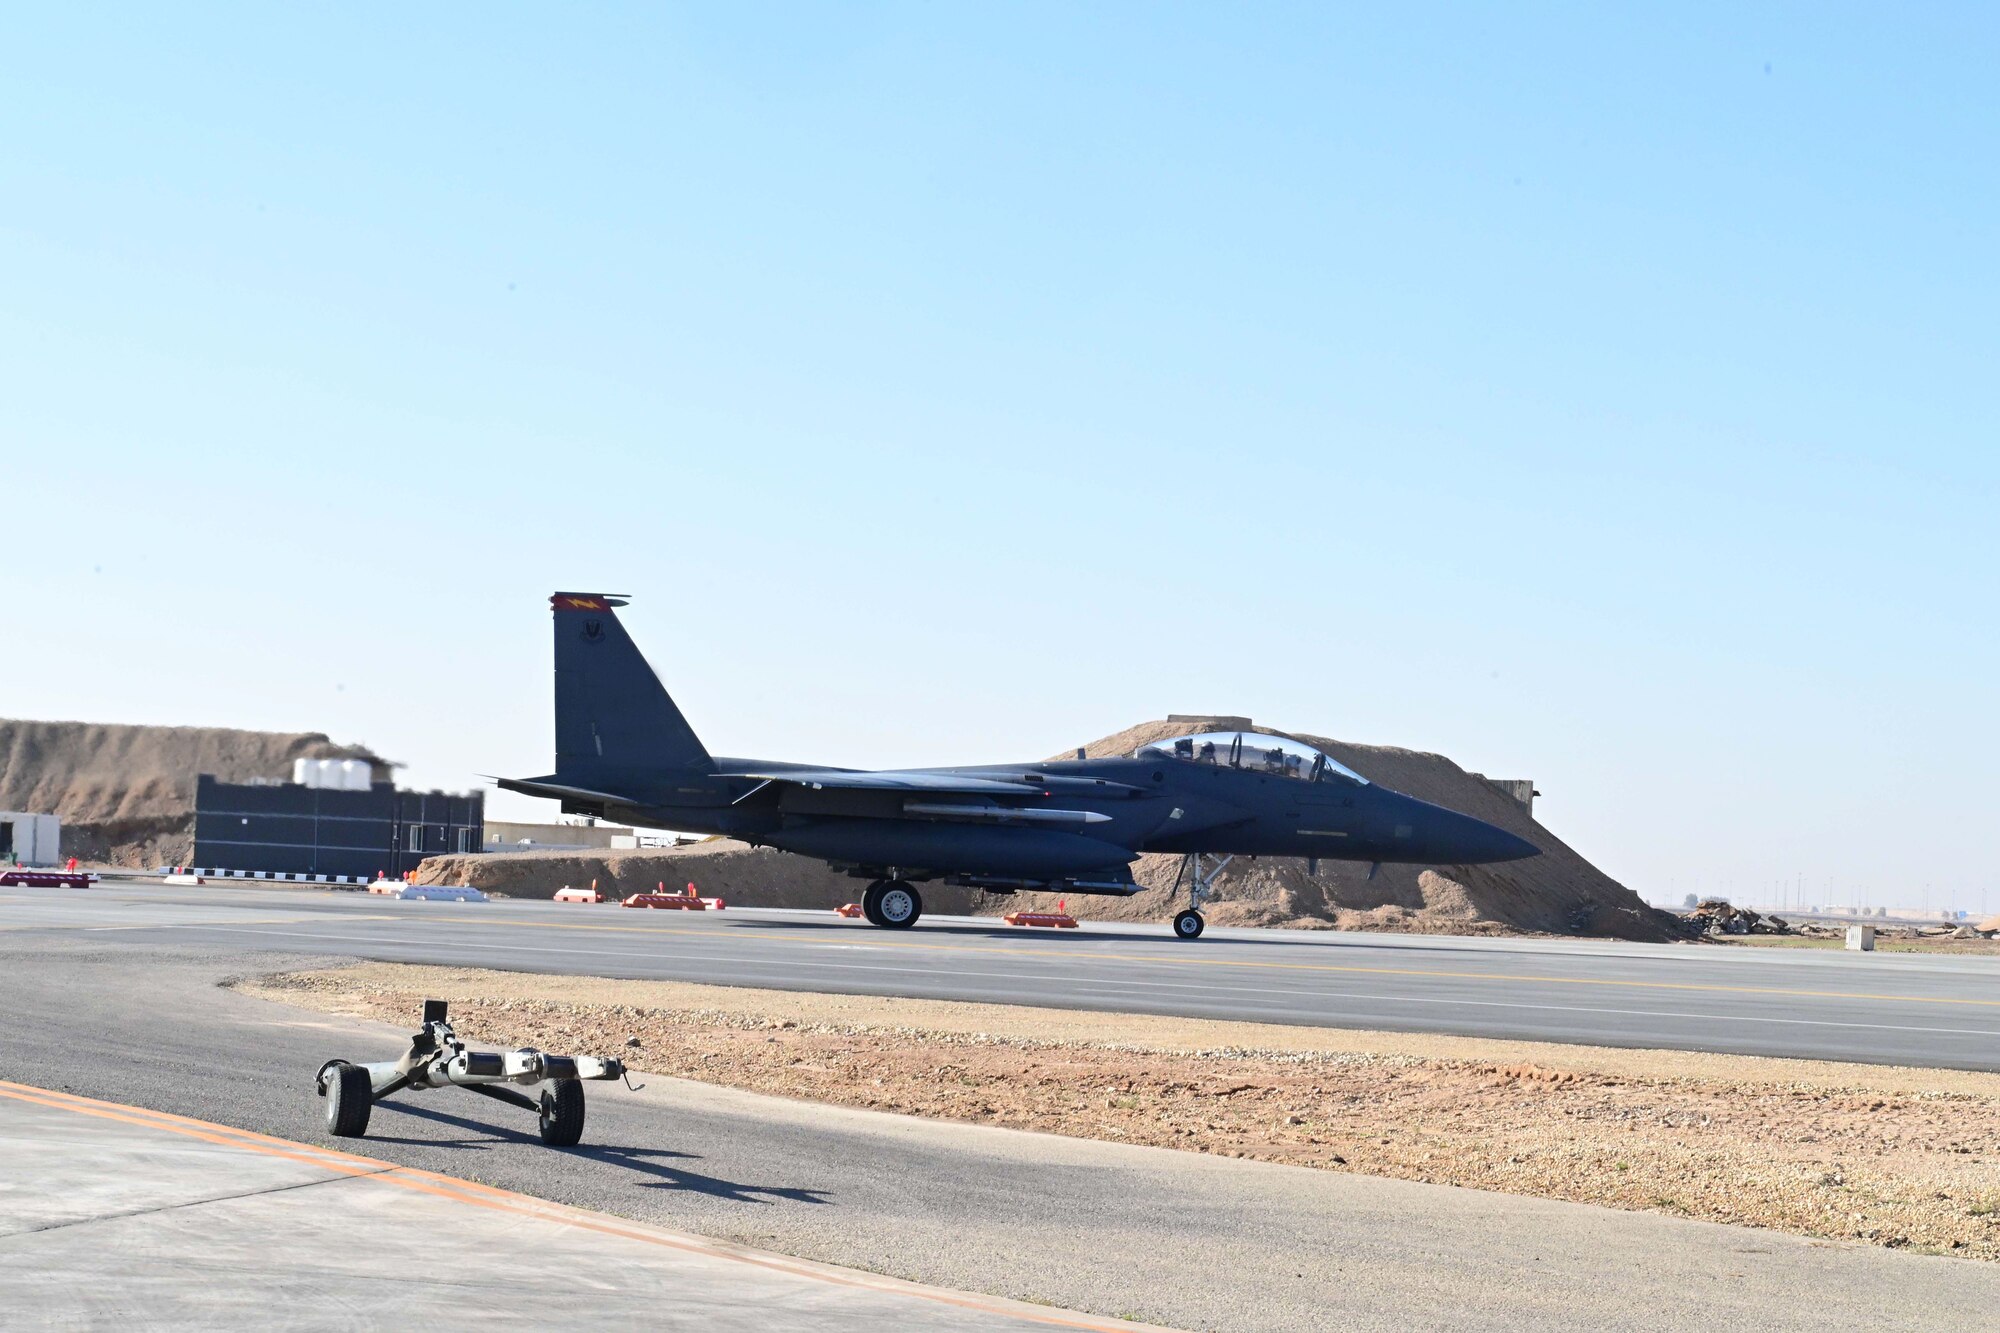 The jet was part of Operation Agile Spartan IV, a twice-annual exercise hosted by Ninth Air Force (Air Forces Central) to enhance Agile Combat Employment capabilities and strengthen regional partnerships.